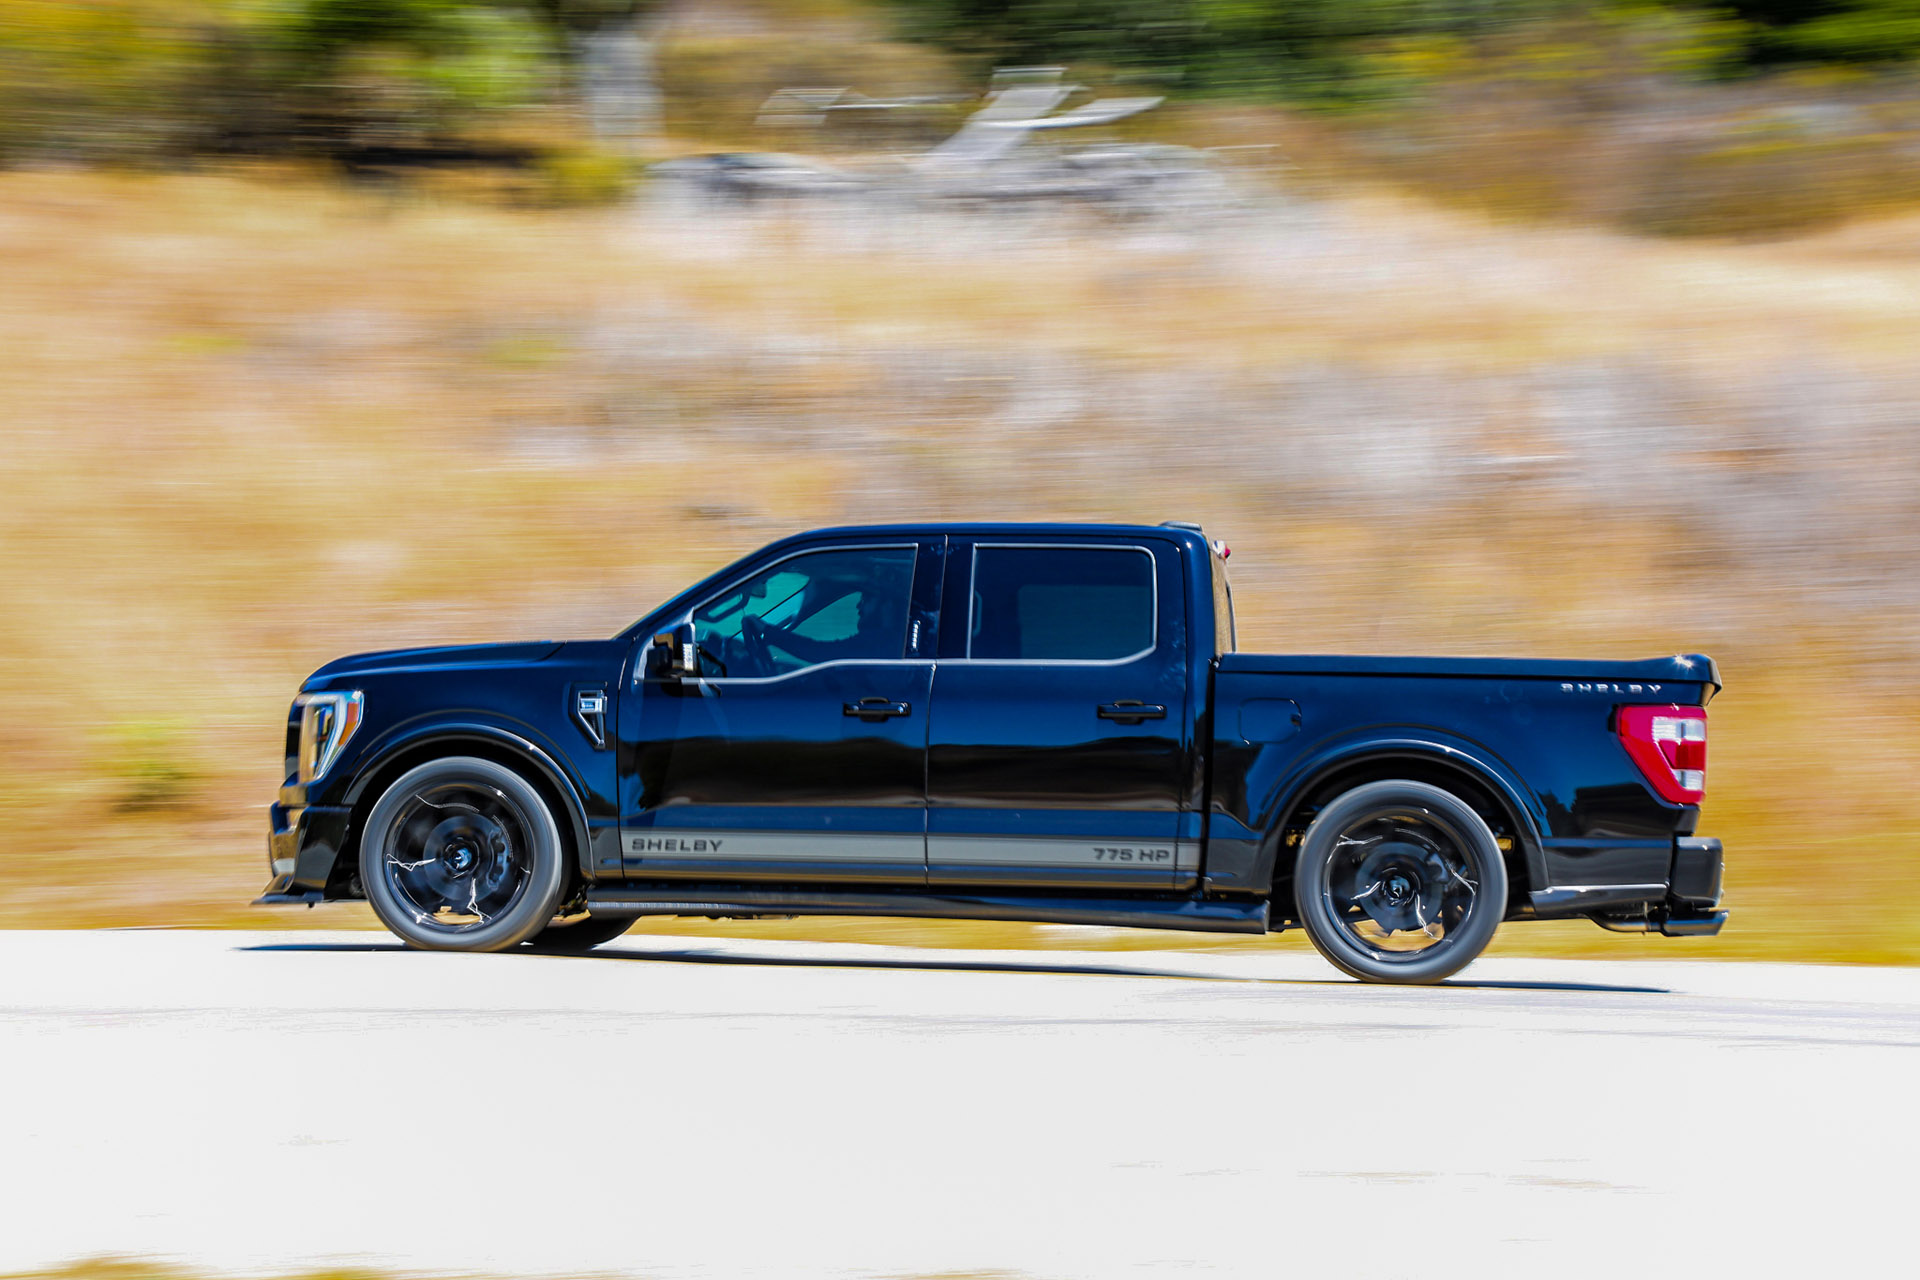 2021 Shelby F150 Super Snake Pumps Out 775 HP, Priced From 113,680